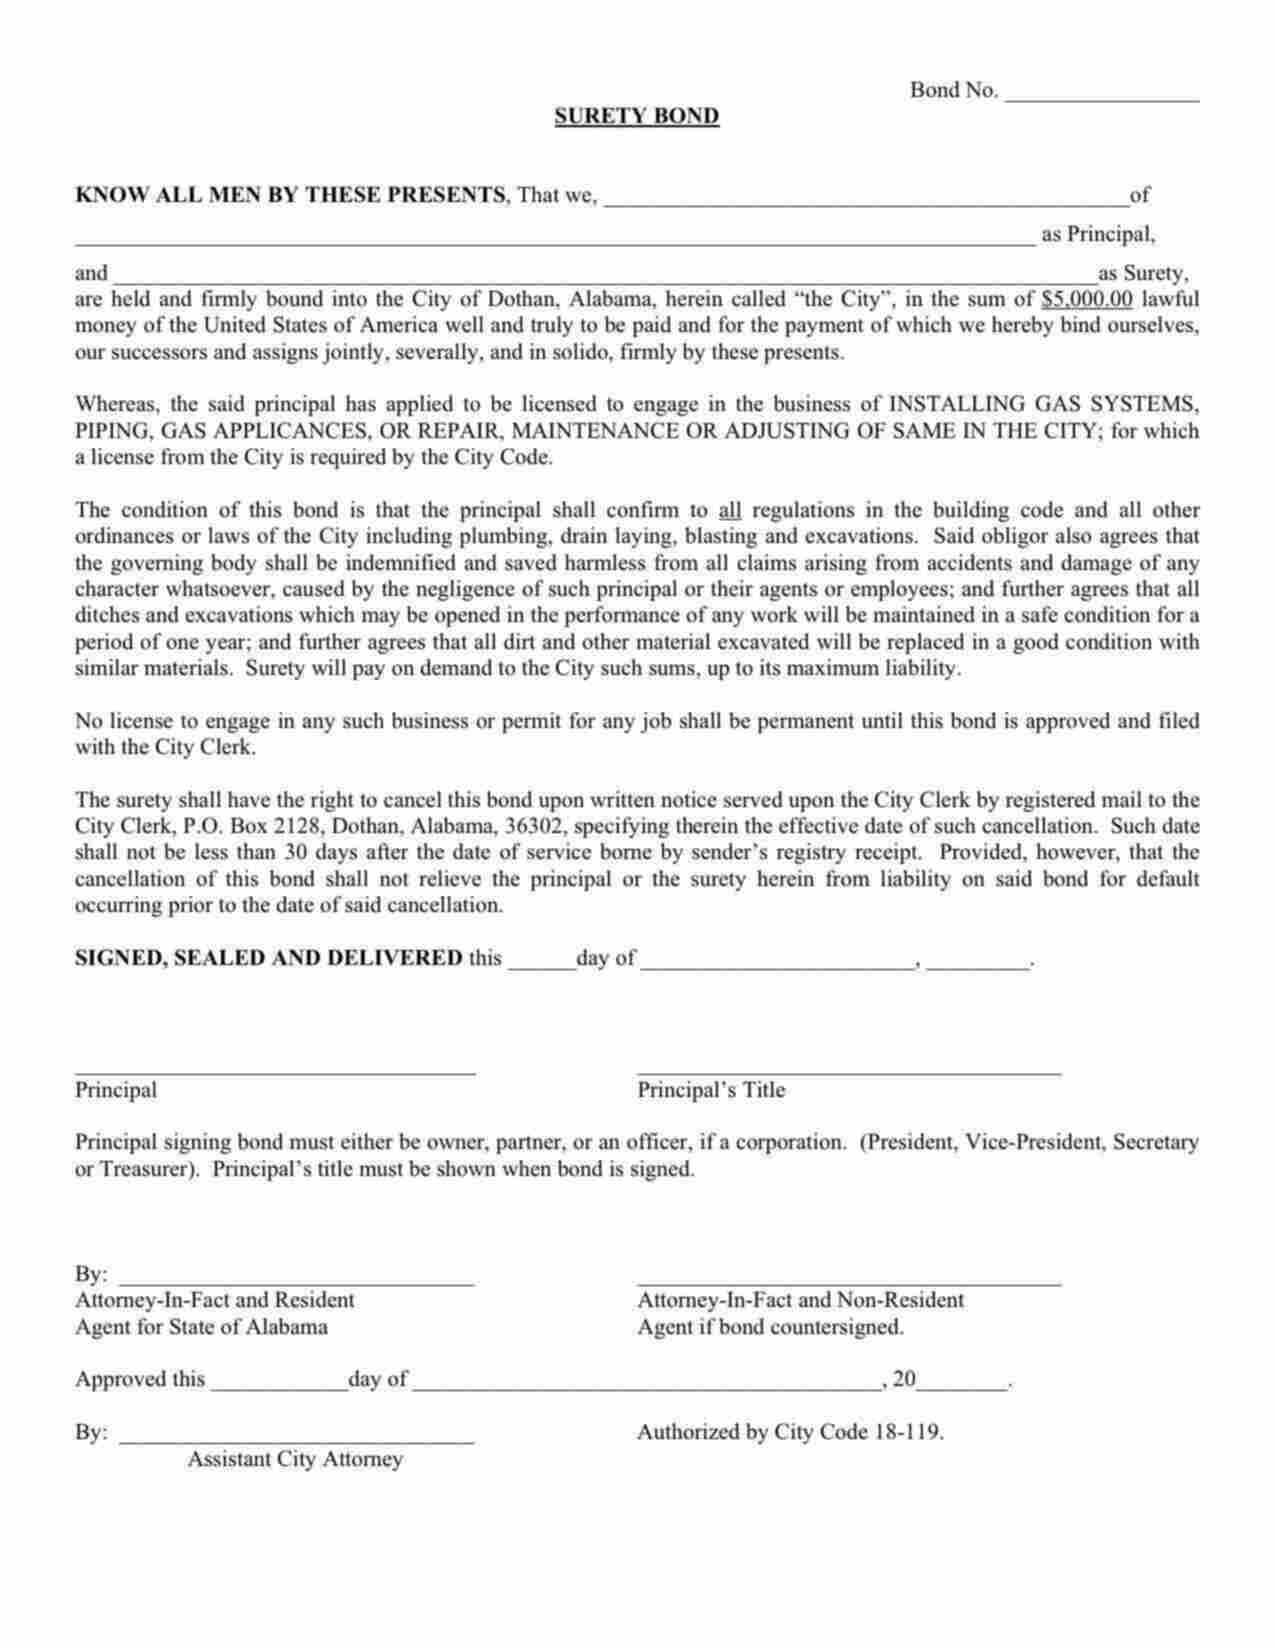 Alabama Gas System, Piping, or Appliance Installation Bond Form